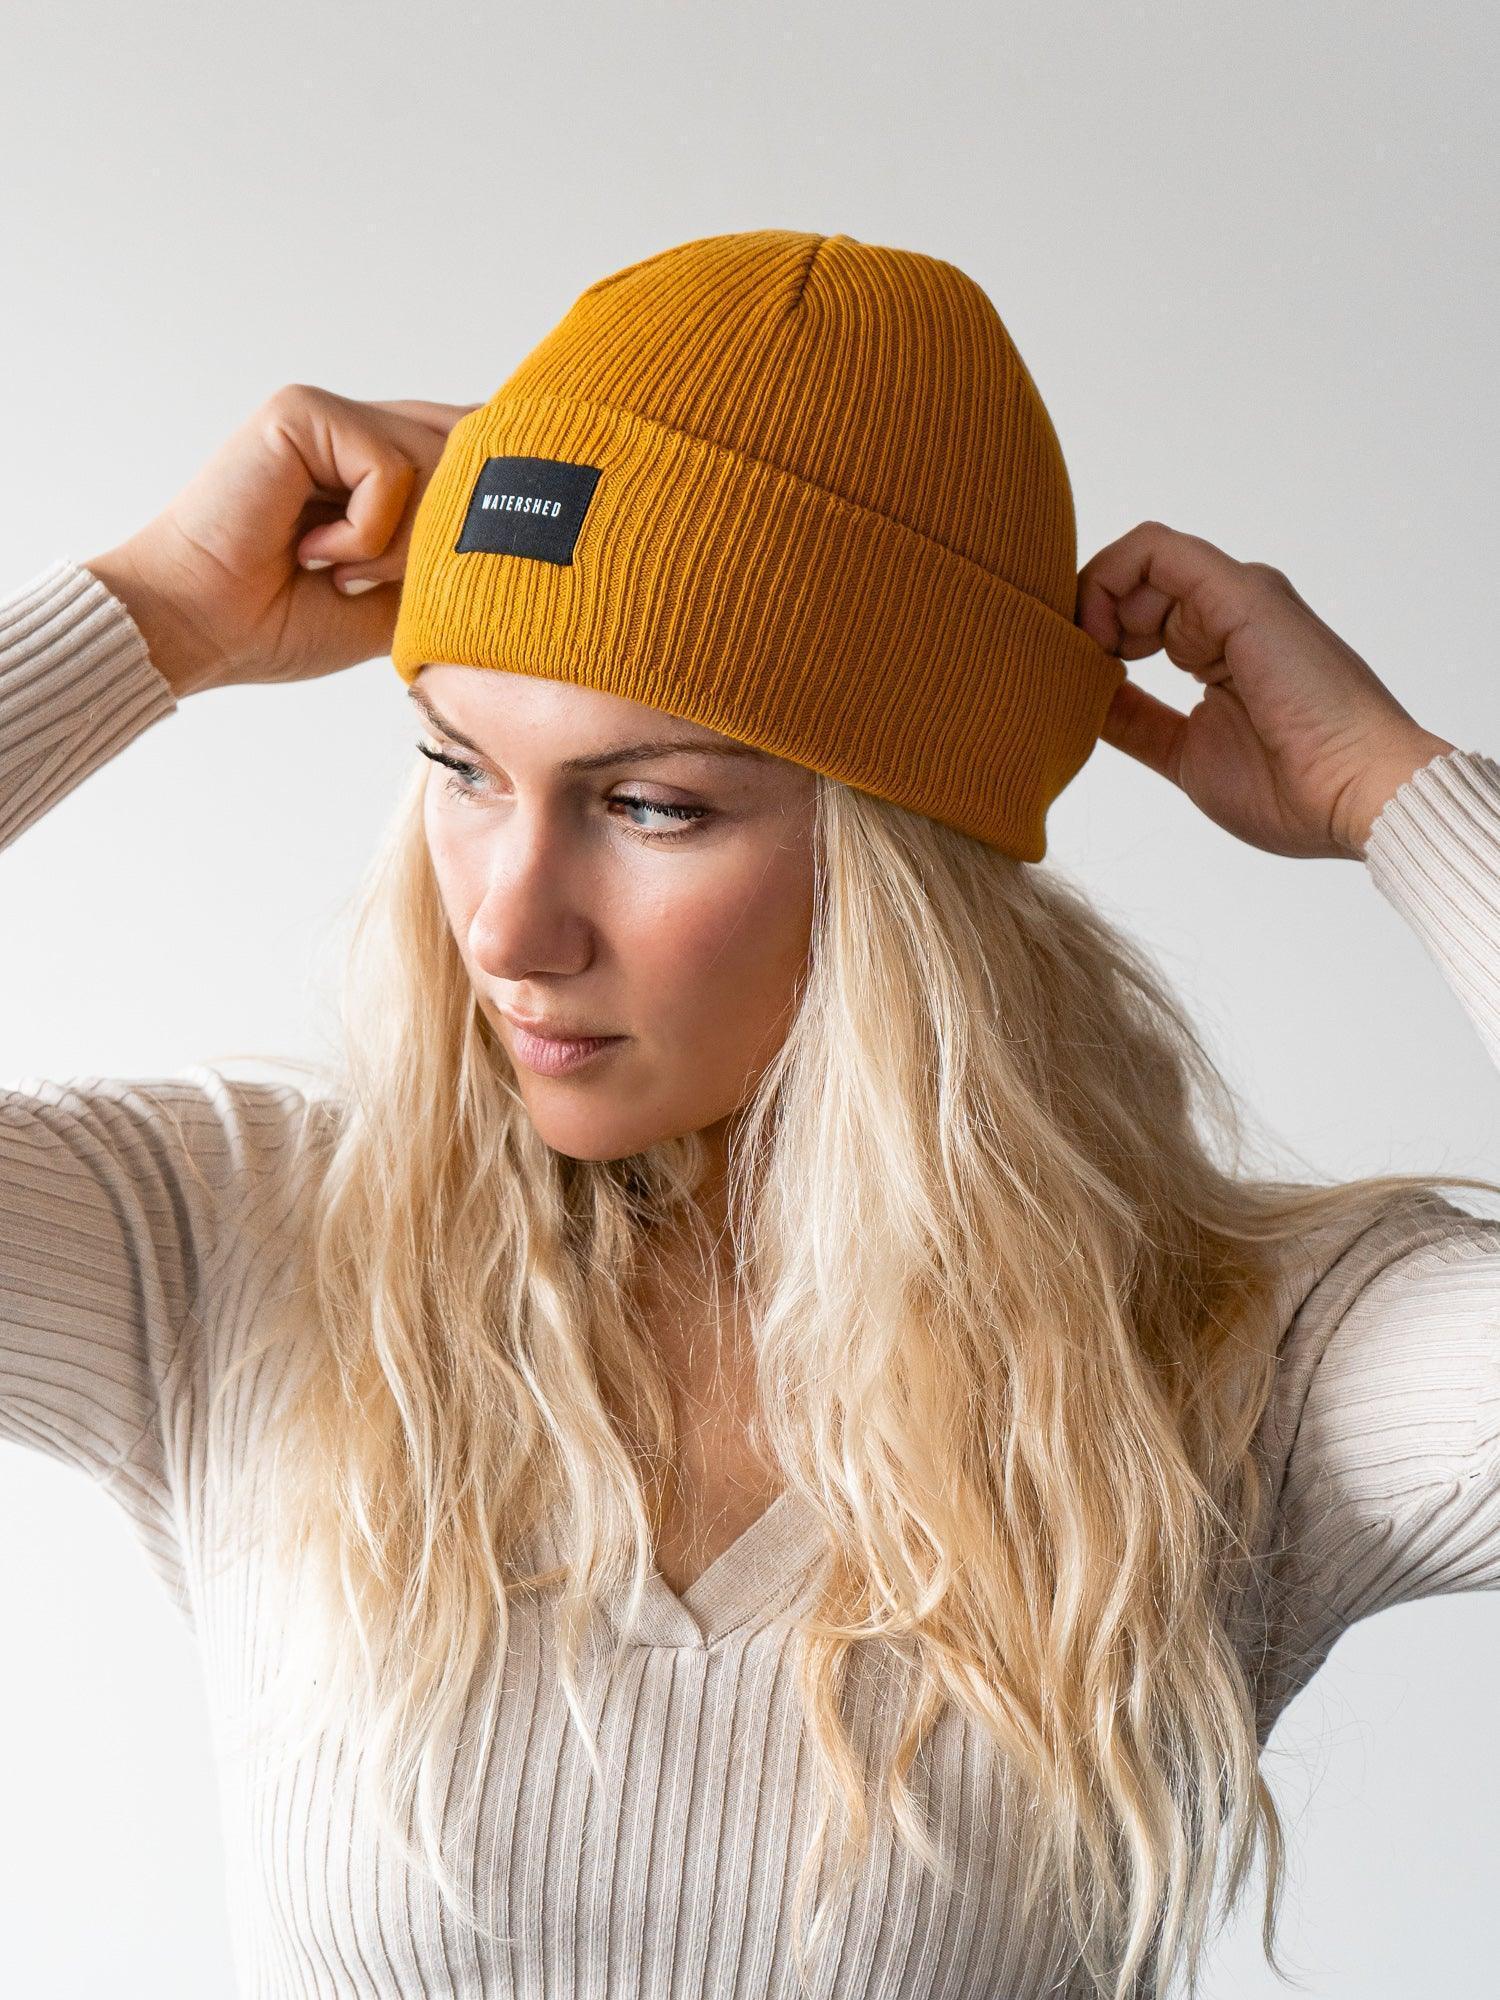 Mustard Organic Ridge Beanie - Embrace eco-friendly warmth and style with our mustard-colored organic ridge beanie, a sustainable and chic accessory for cooler days.